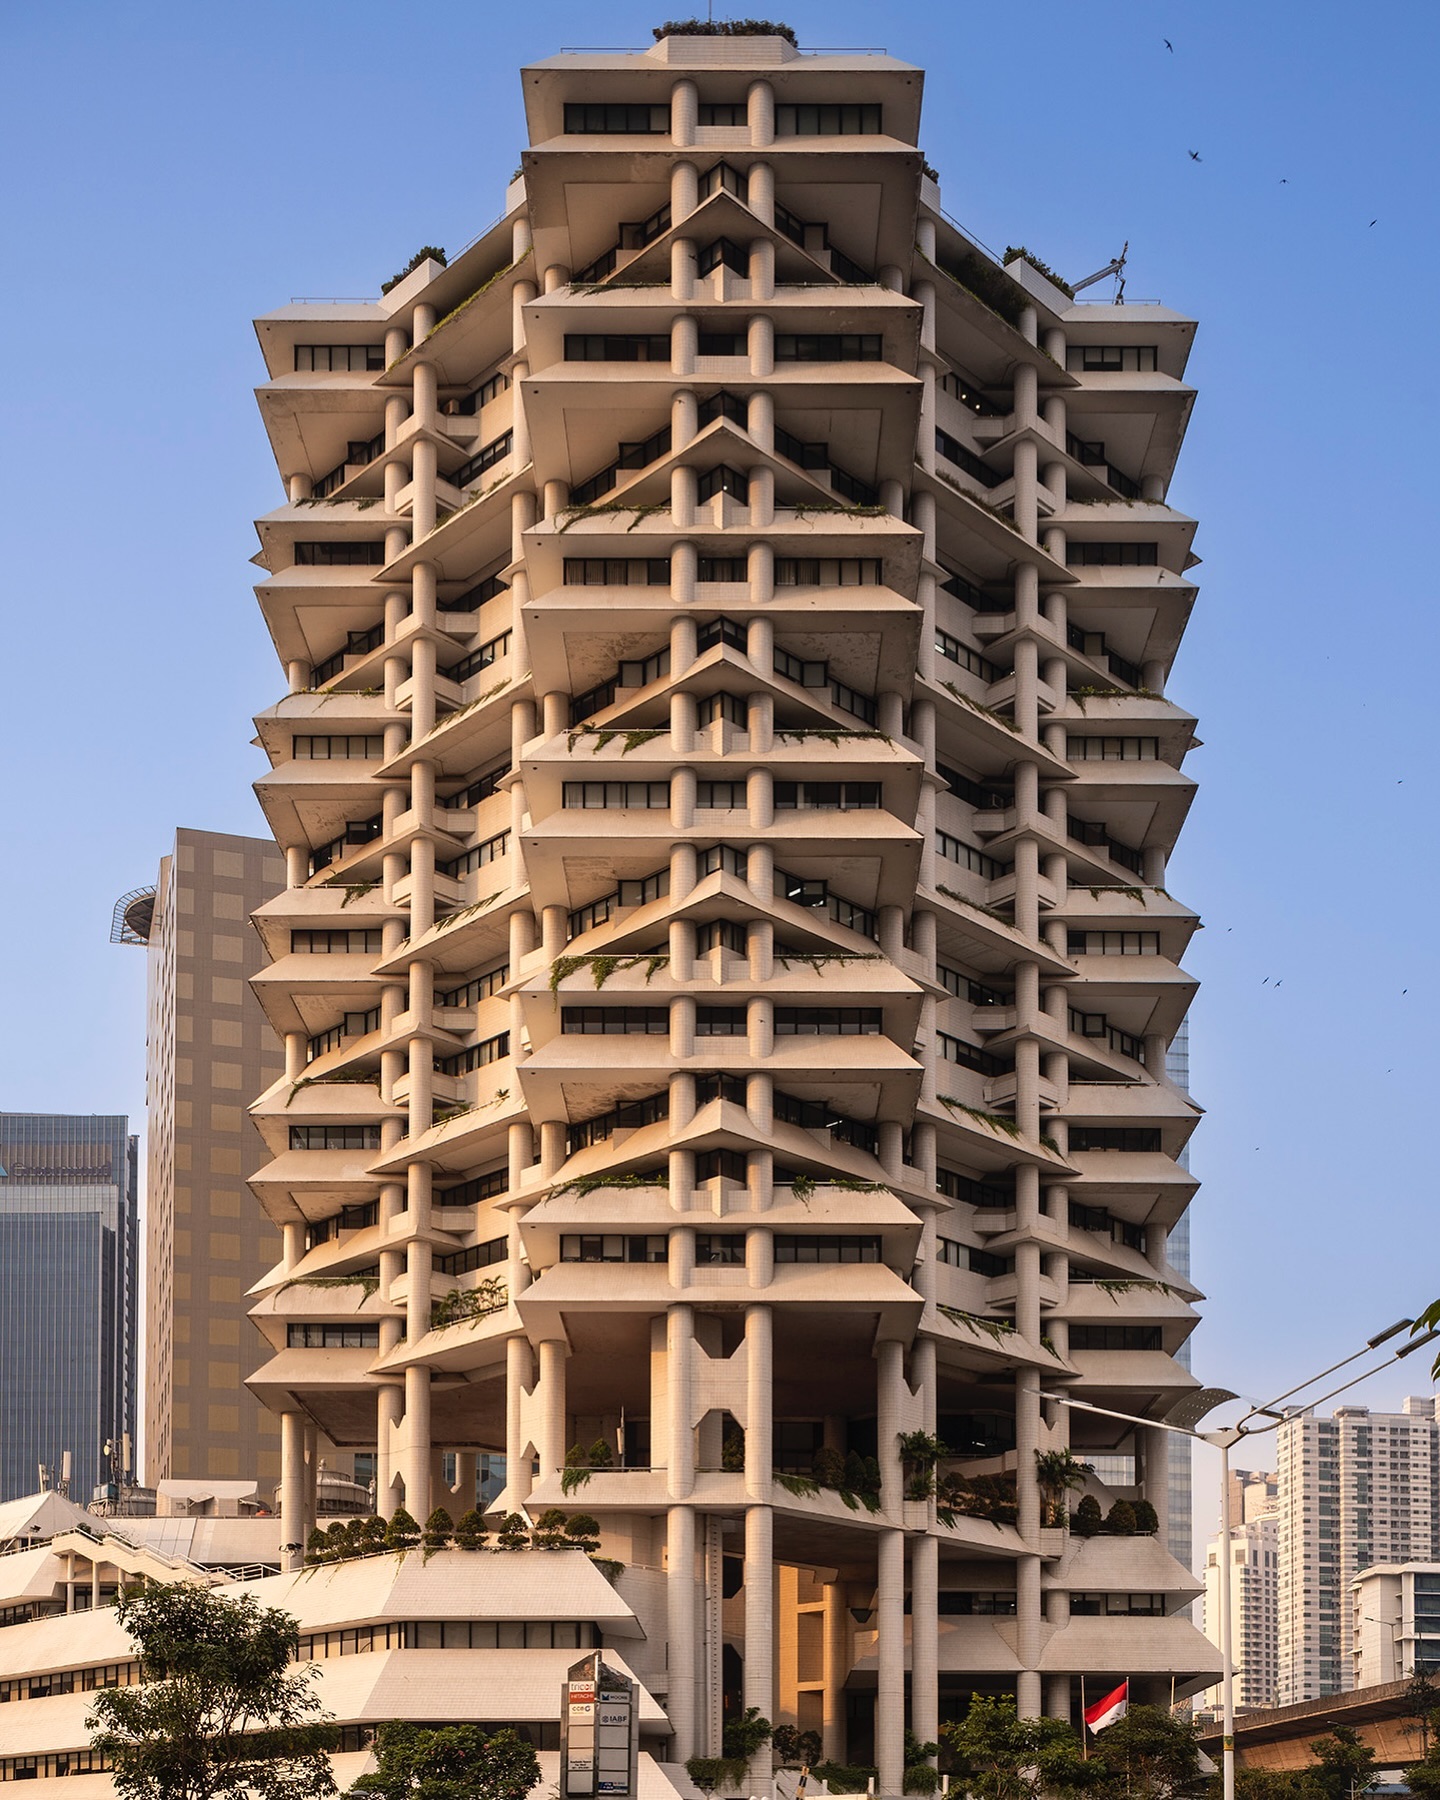 A stacked tower with rotated geometry